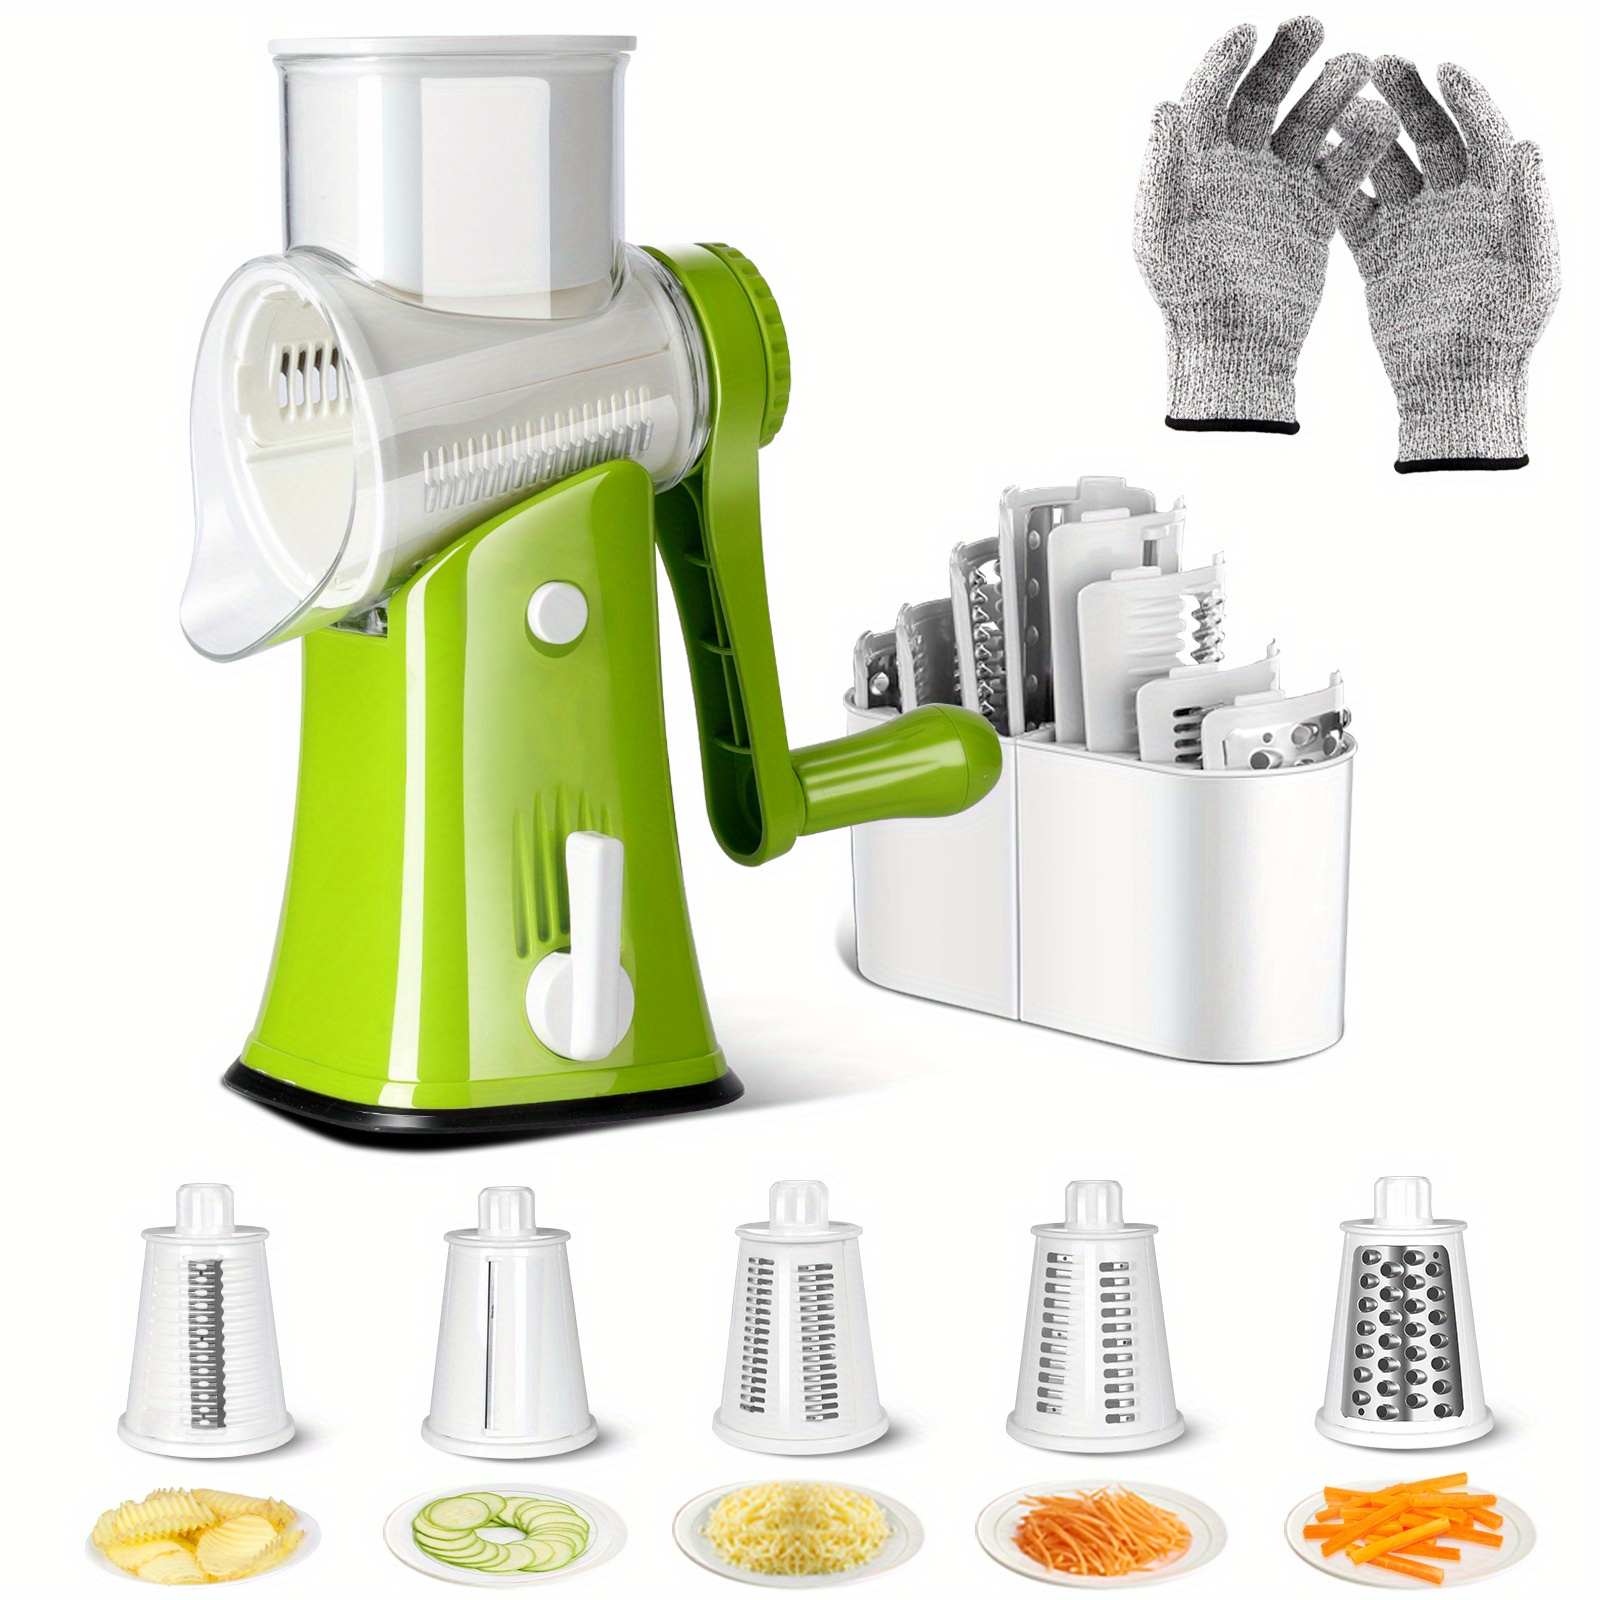 

Mastertop Rotary Cheese Grater With Handle & 5 Stainless Steel Drum Blades - Manual Slicer For Cheese & Vegetables